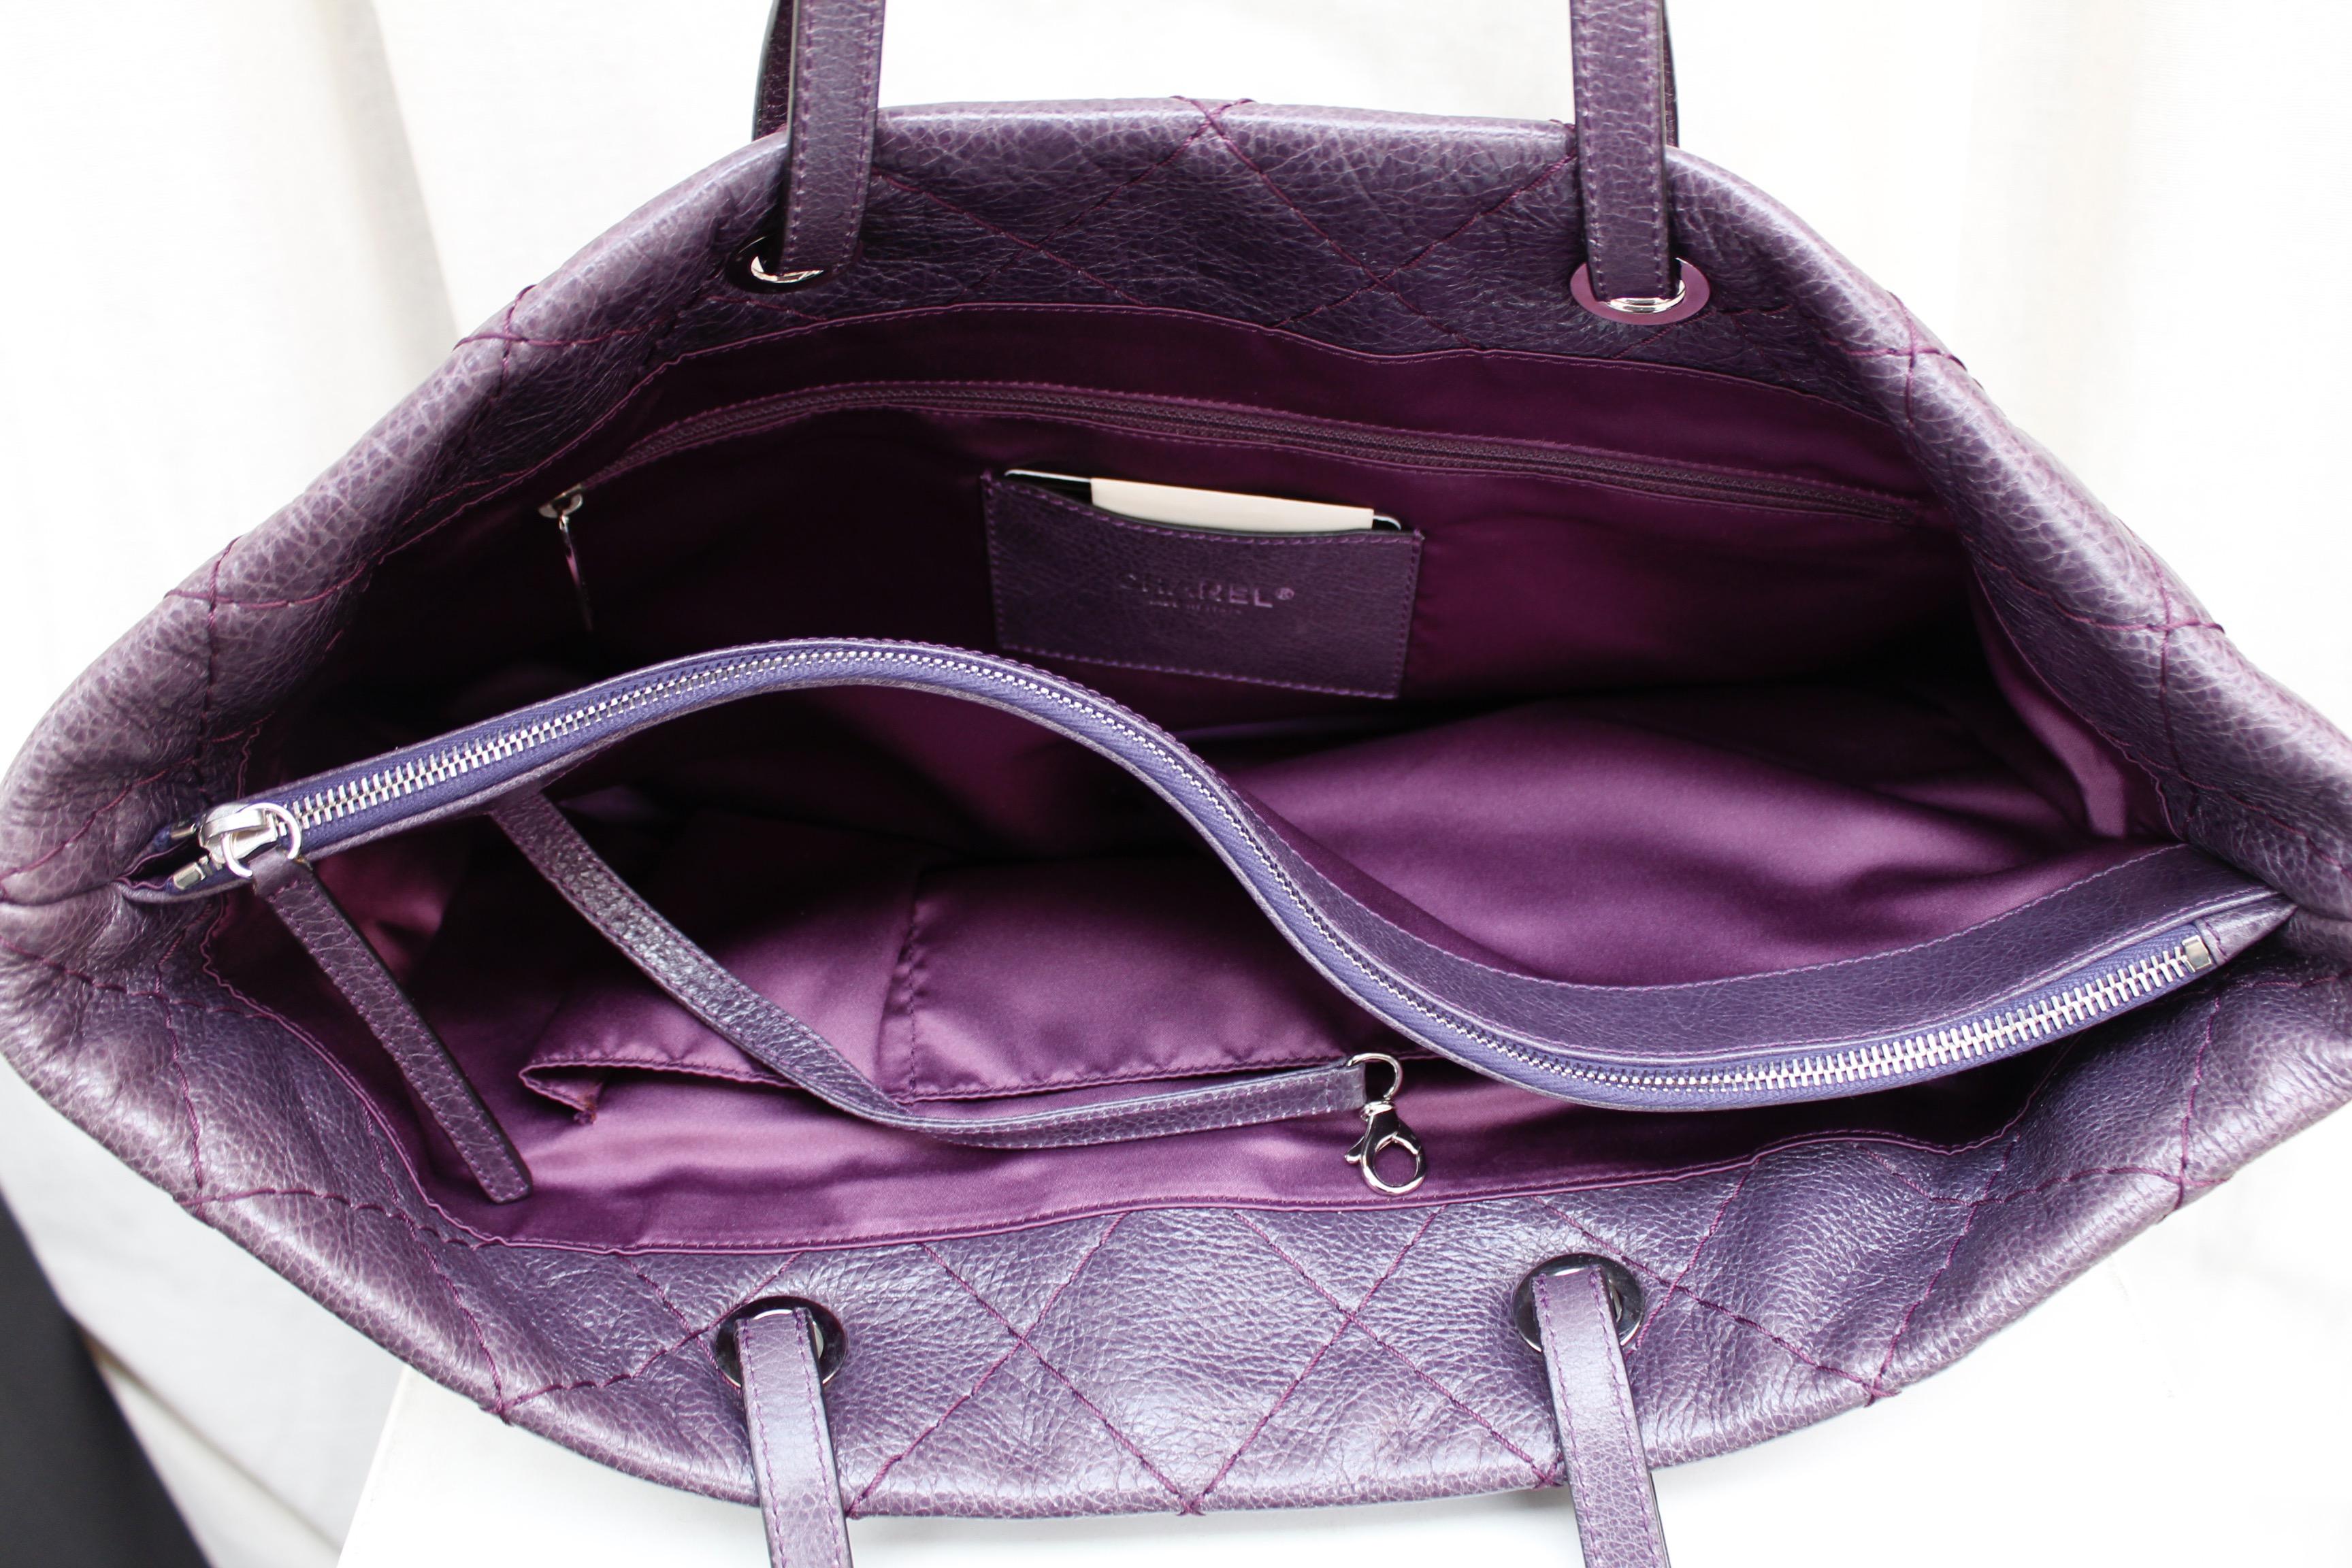 Chanel tote bag in over stitched eggplant leather 2